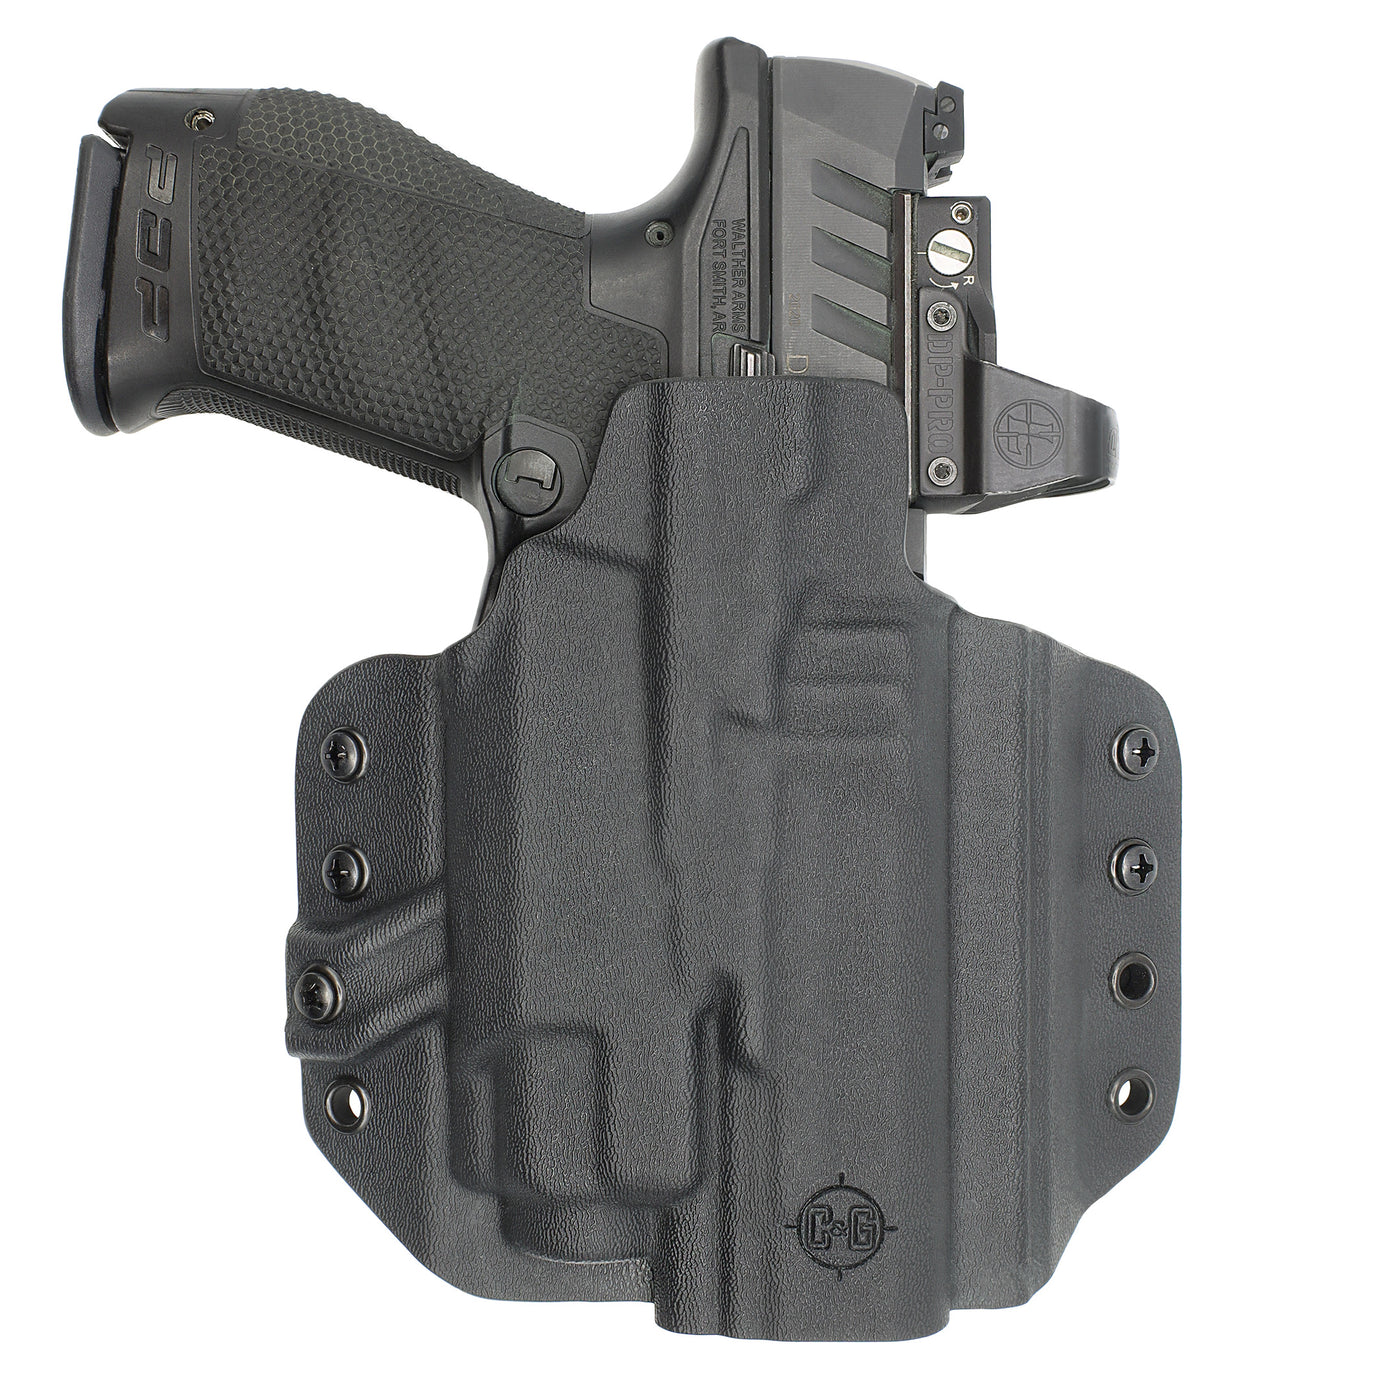 C&G Holsters quickship OWB tactical M&P 9/40 streamlight TLR8 holstered